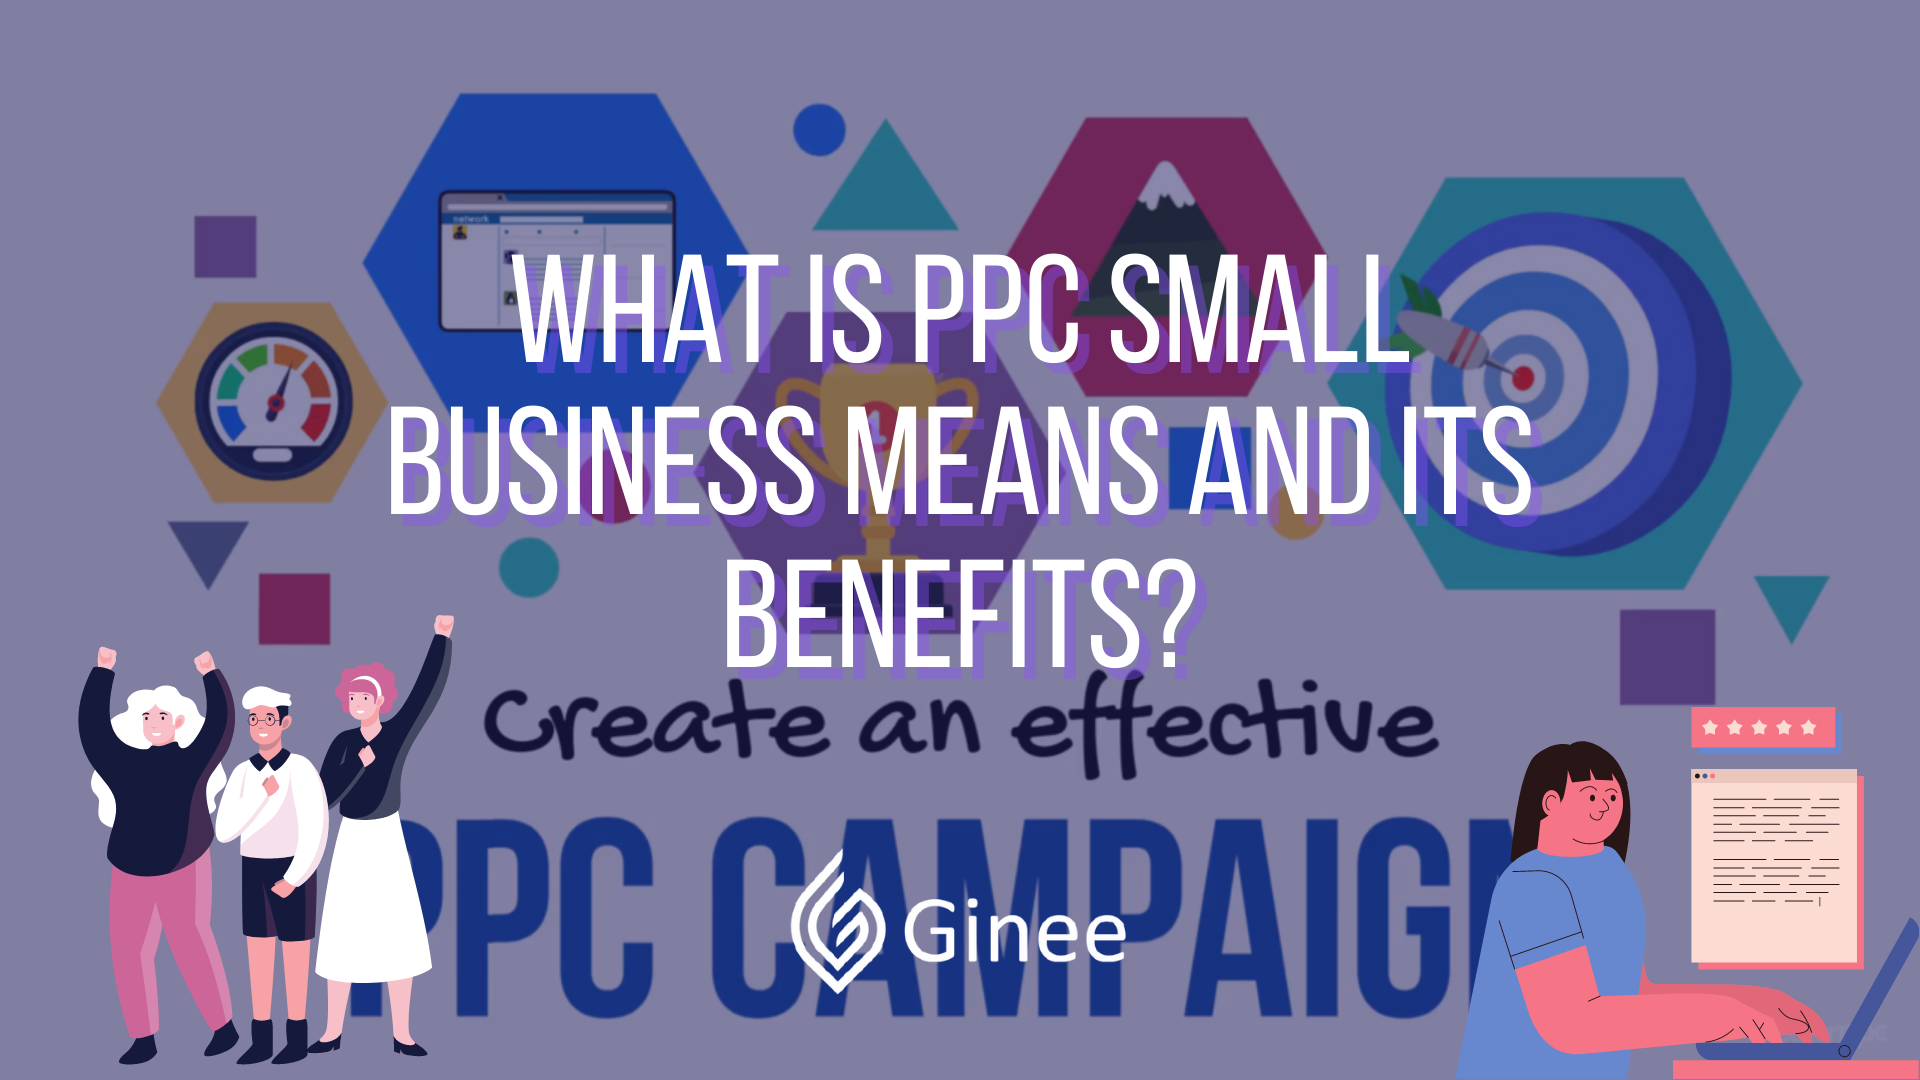 What Is PPC Small Business Means and Its Benefits? - Ginee